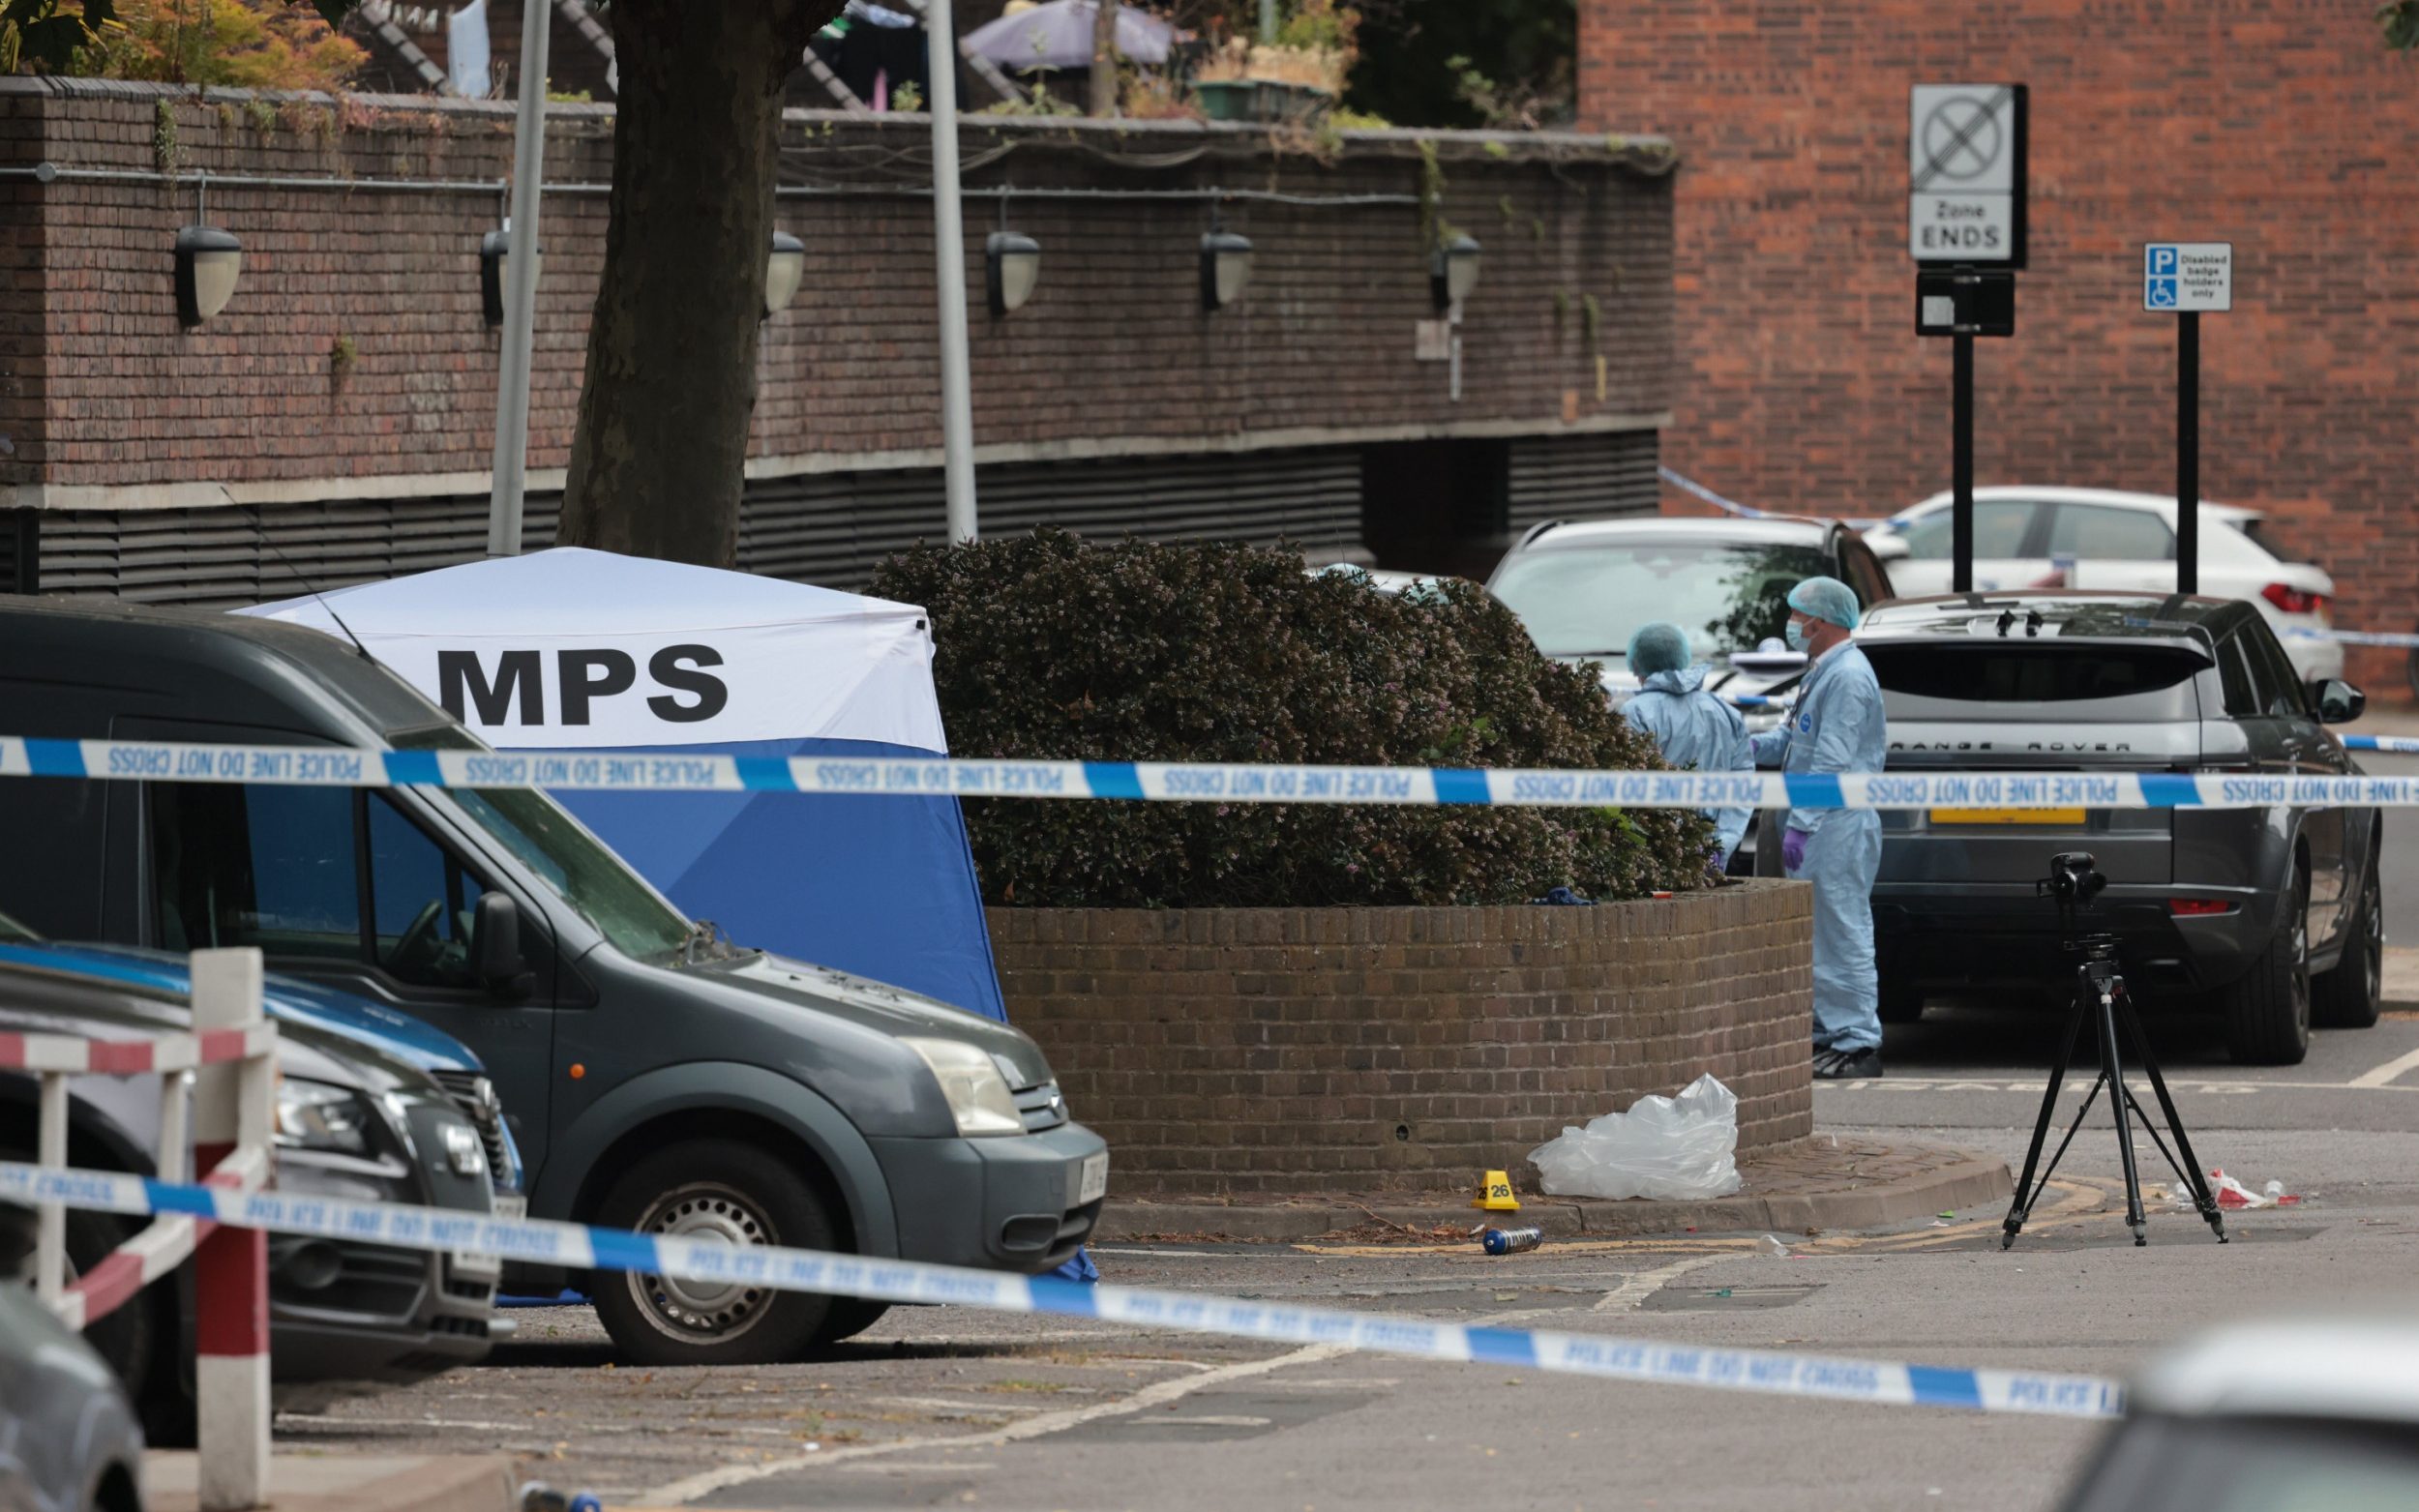 Youths stabbed to death in London ‘as they filmed rap music video’